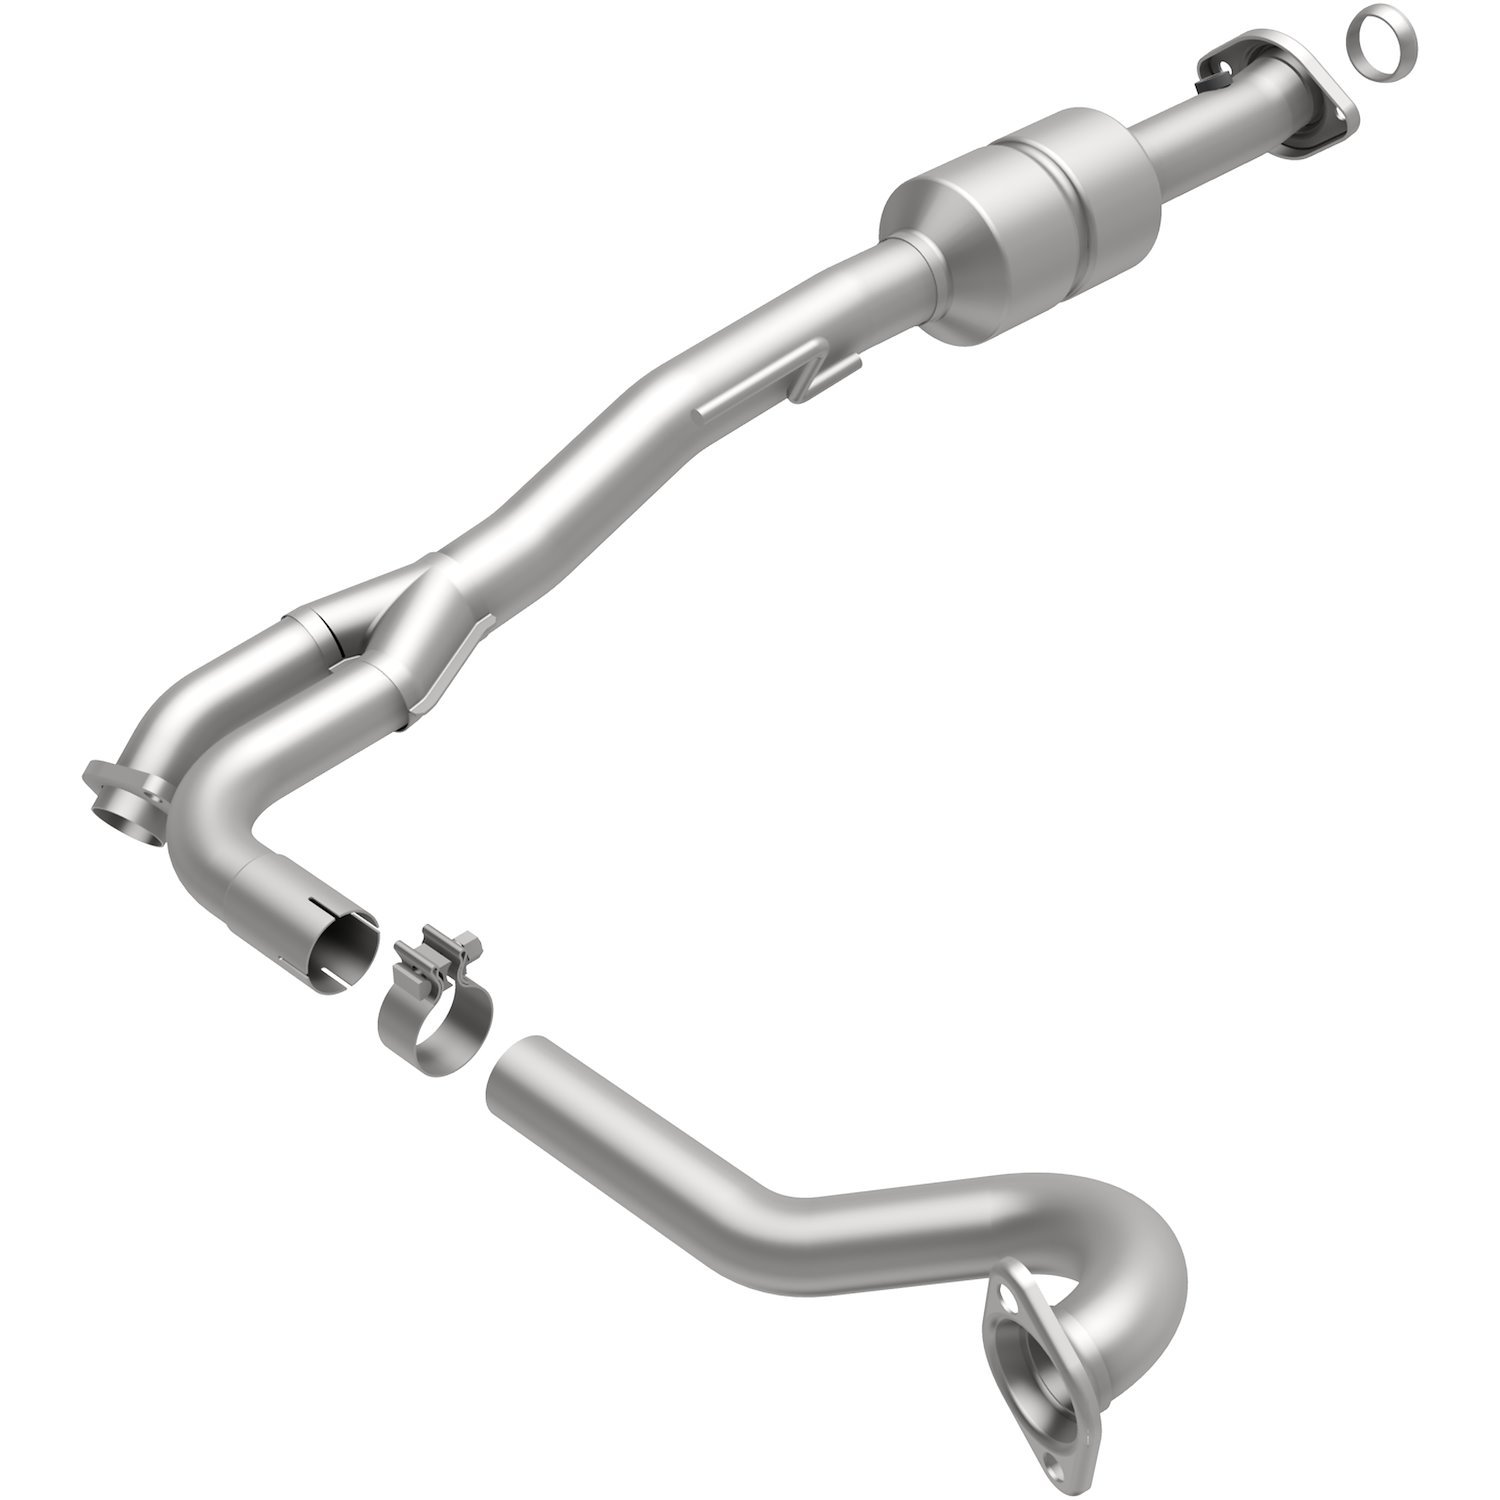 2002-2003 Jeep Liberty OEM Grade Federal / EPA Compliant Direct-Fit Catalytic Converter